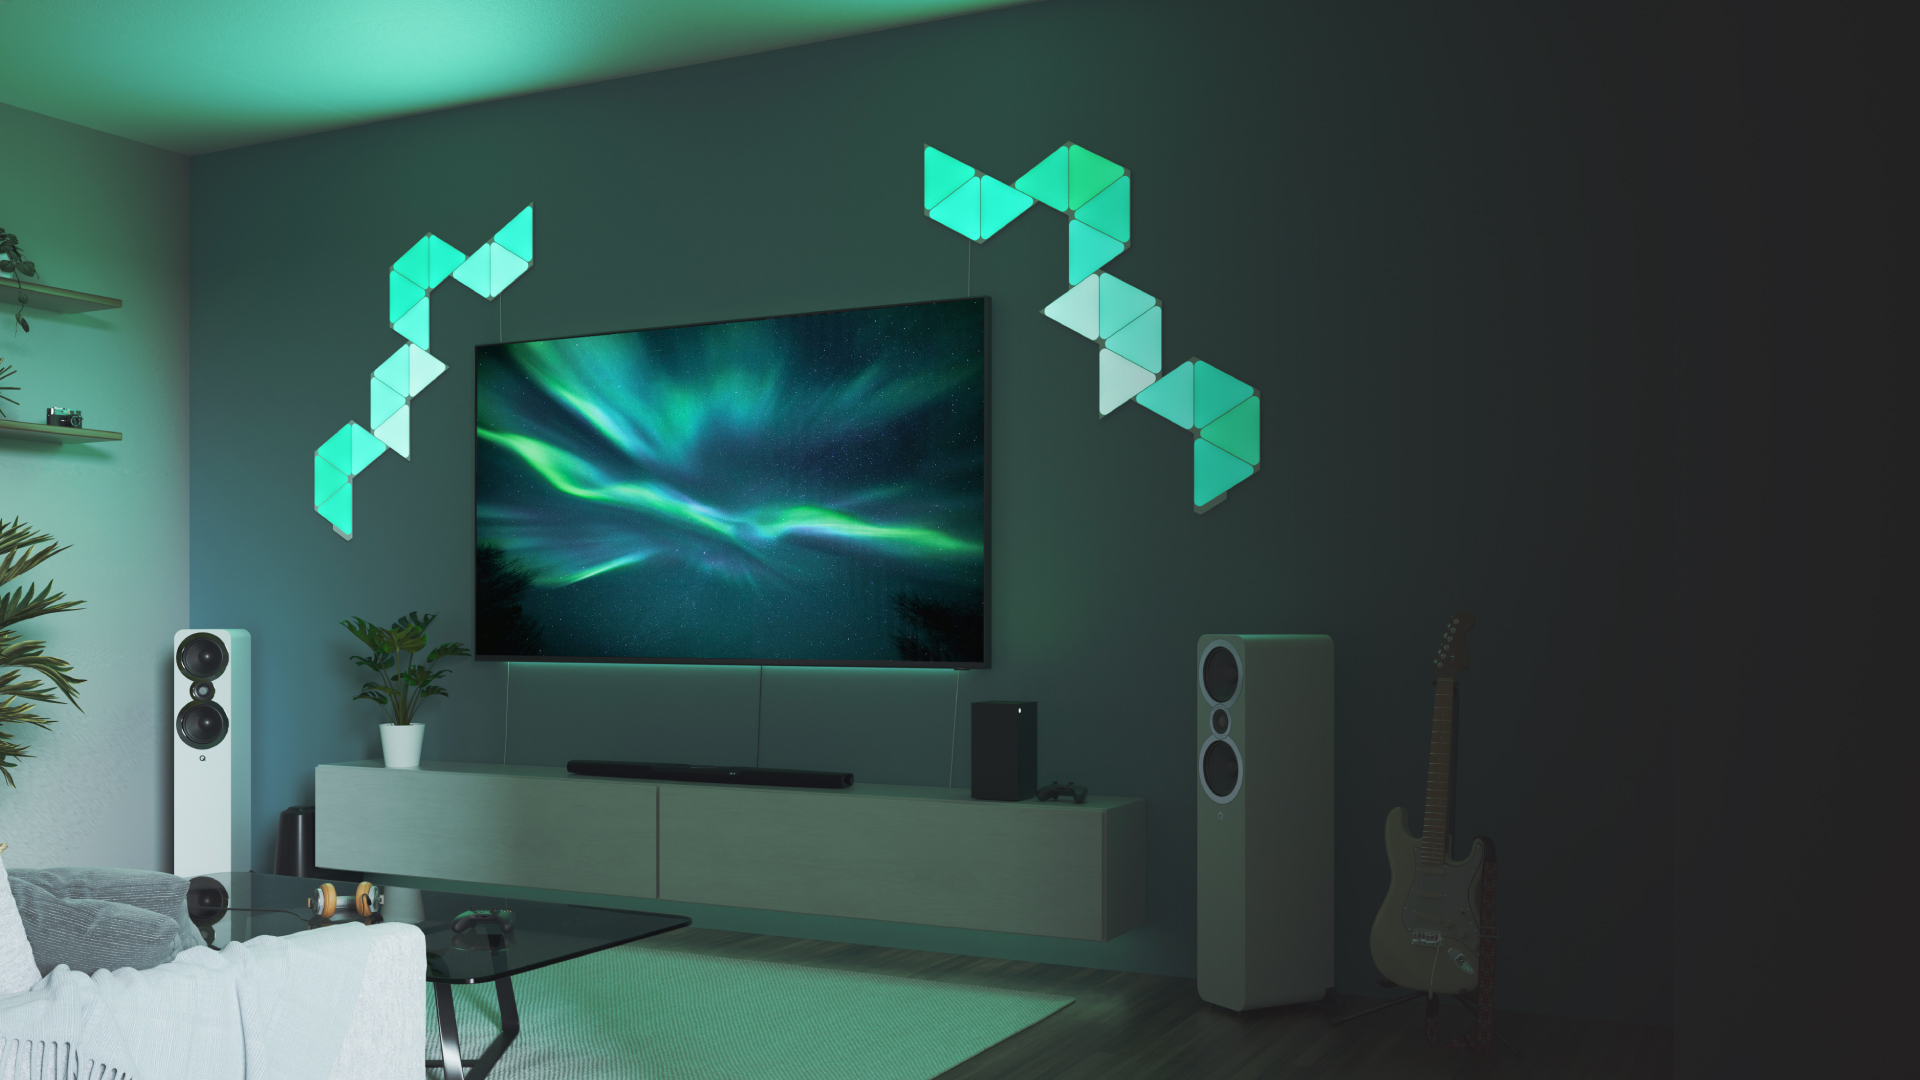 This is an image of two separate 15 panel designs of Nanoleaf Shapes Triangles on the wall beside the TV in the living room. The smart light panels are connected together using linkers and mounted onto the wall with double-sided tape. The perfect living room lights for an immersive entertainment experience.